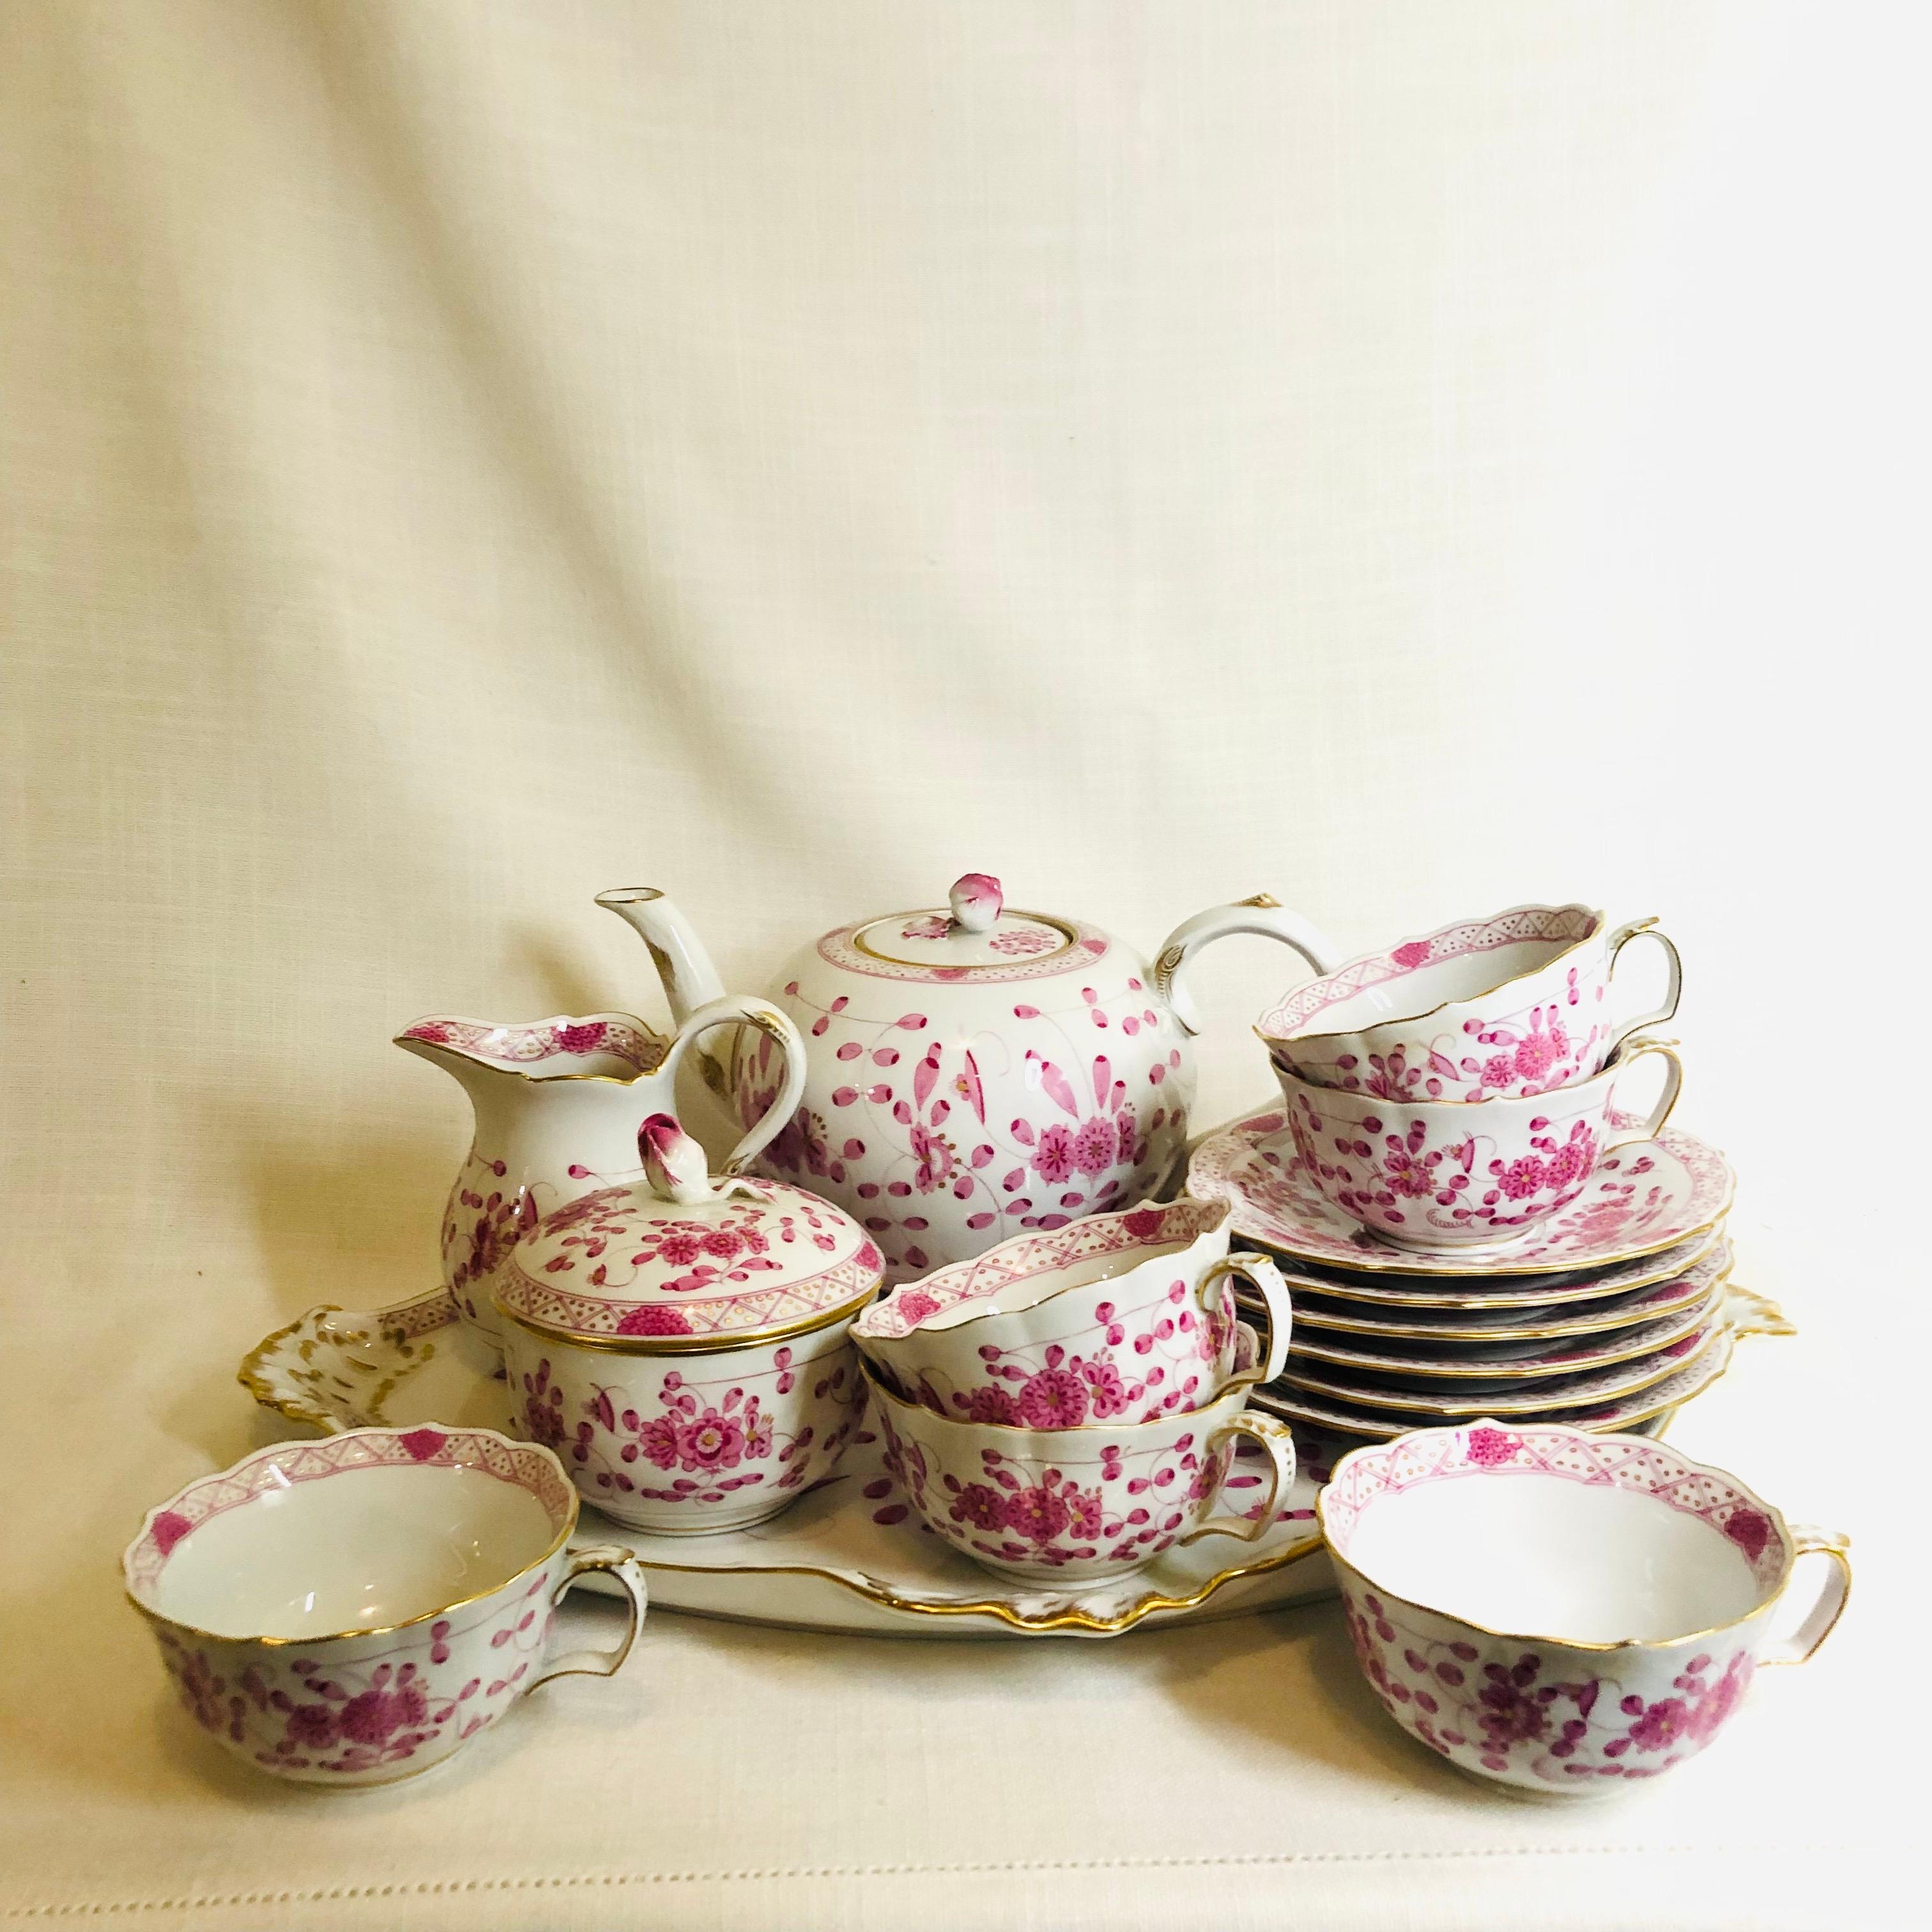 This is a beautiful Meissen purple Indian tea set comprising of a teapot, sugar and creamer, six tea cups and saucers and a serving tray. The teapot and the covered sugar are decorated with raised roses on their tops. All the pieces of the tea set